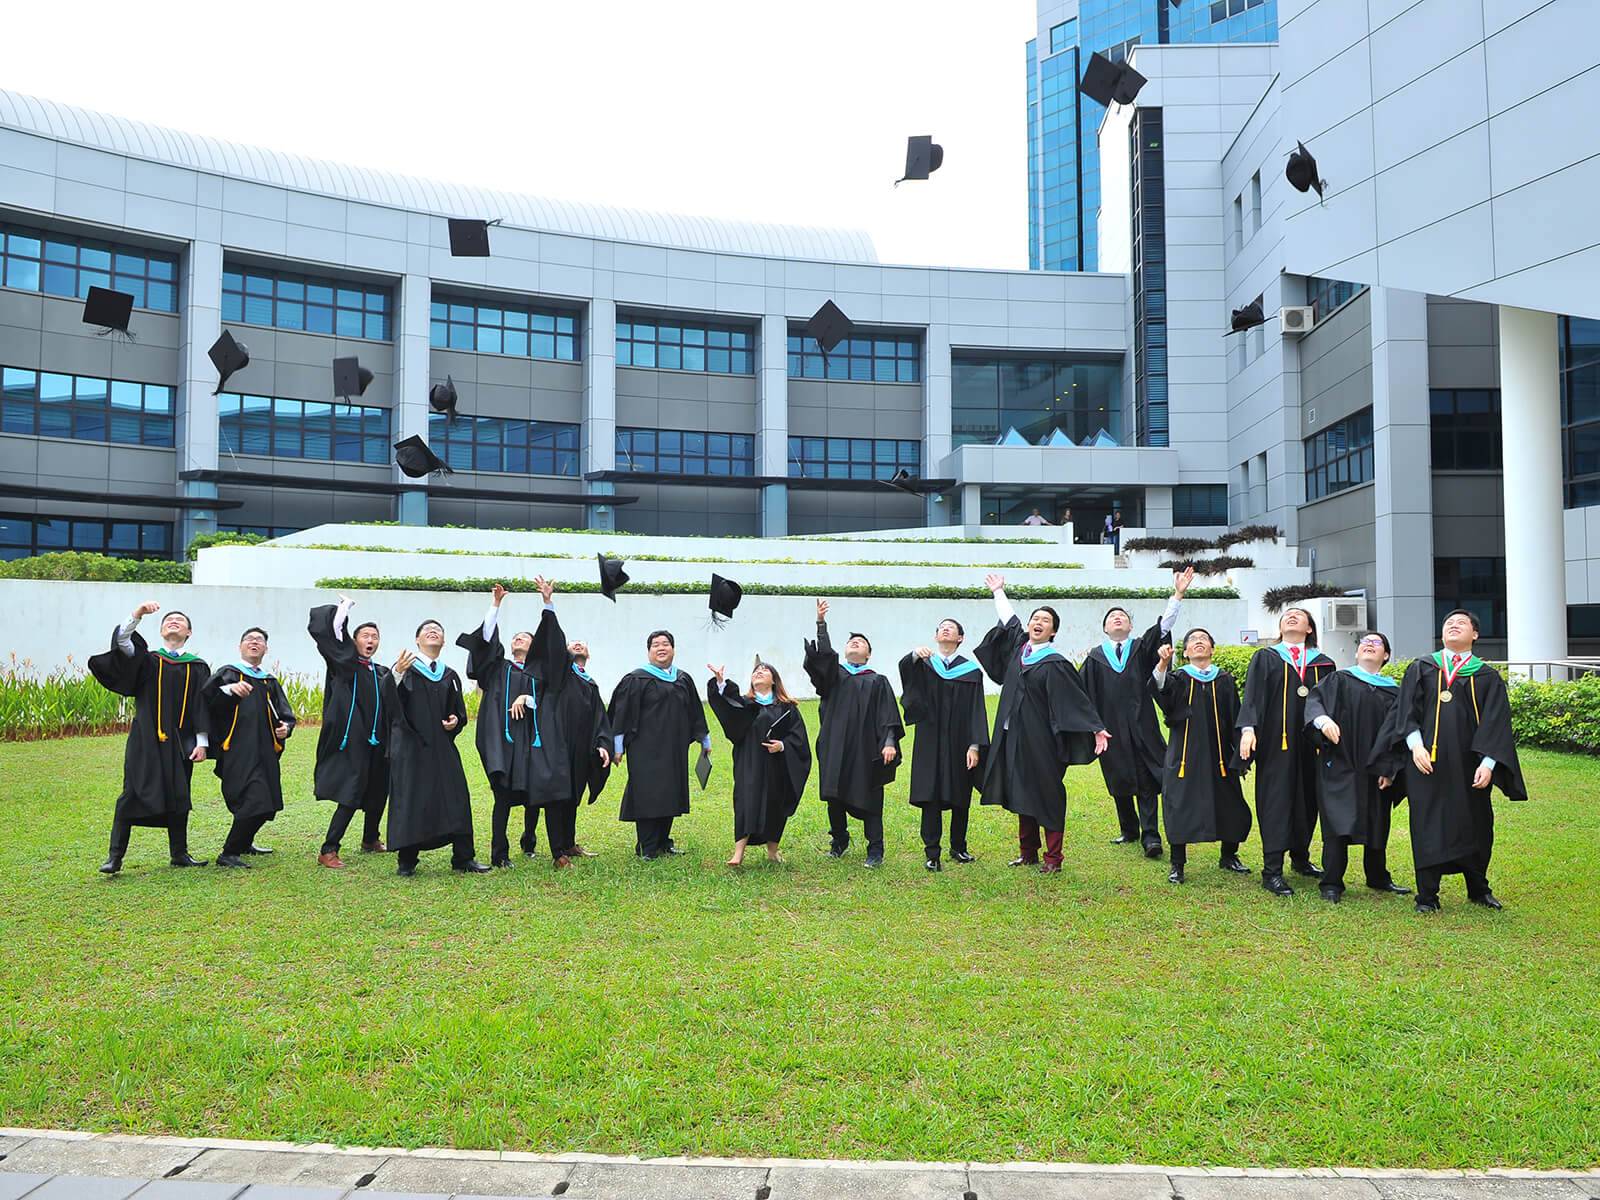 Several lined-up graduates throw their graduation caps into the air while standing outside on the grass.